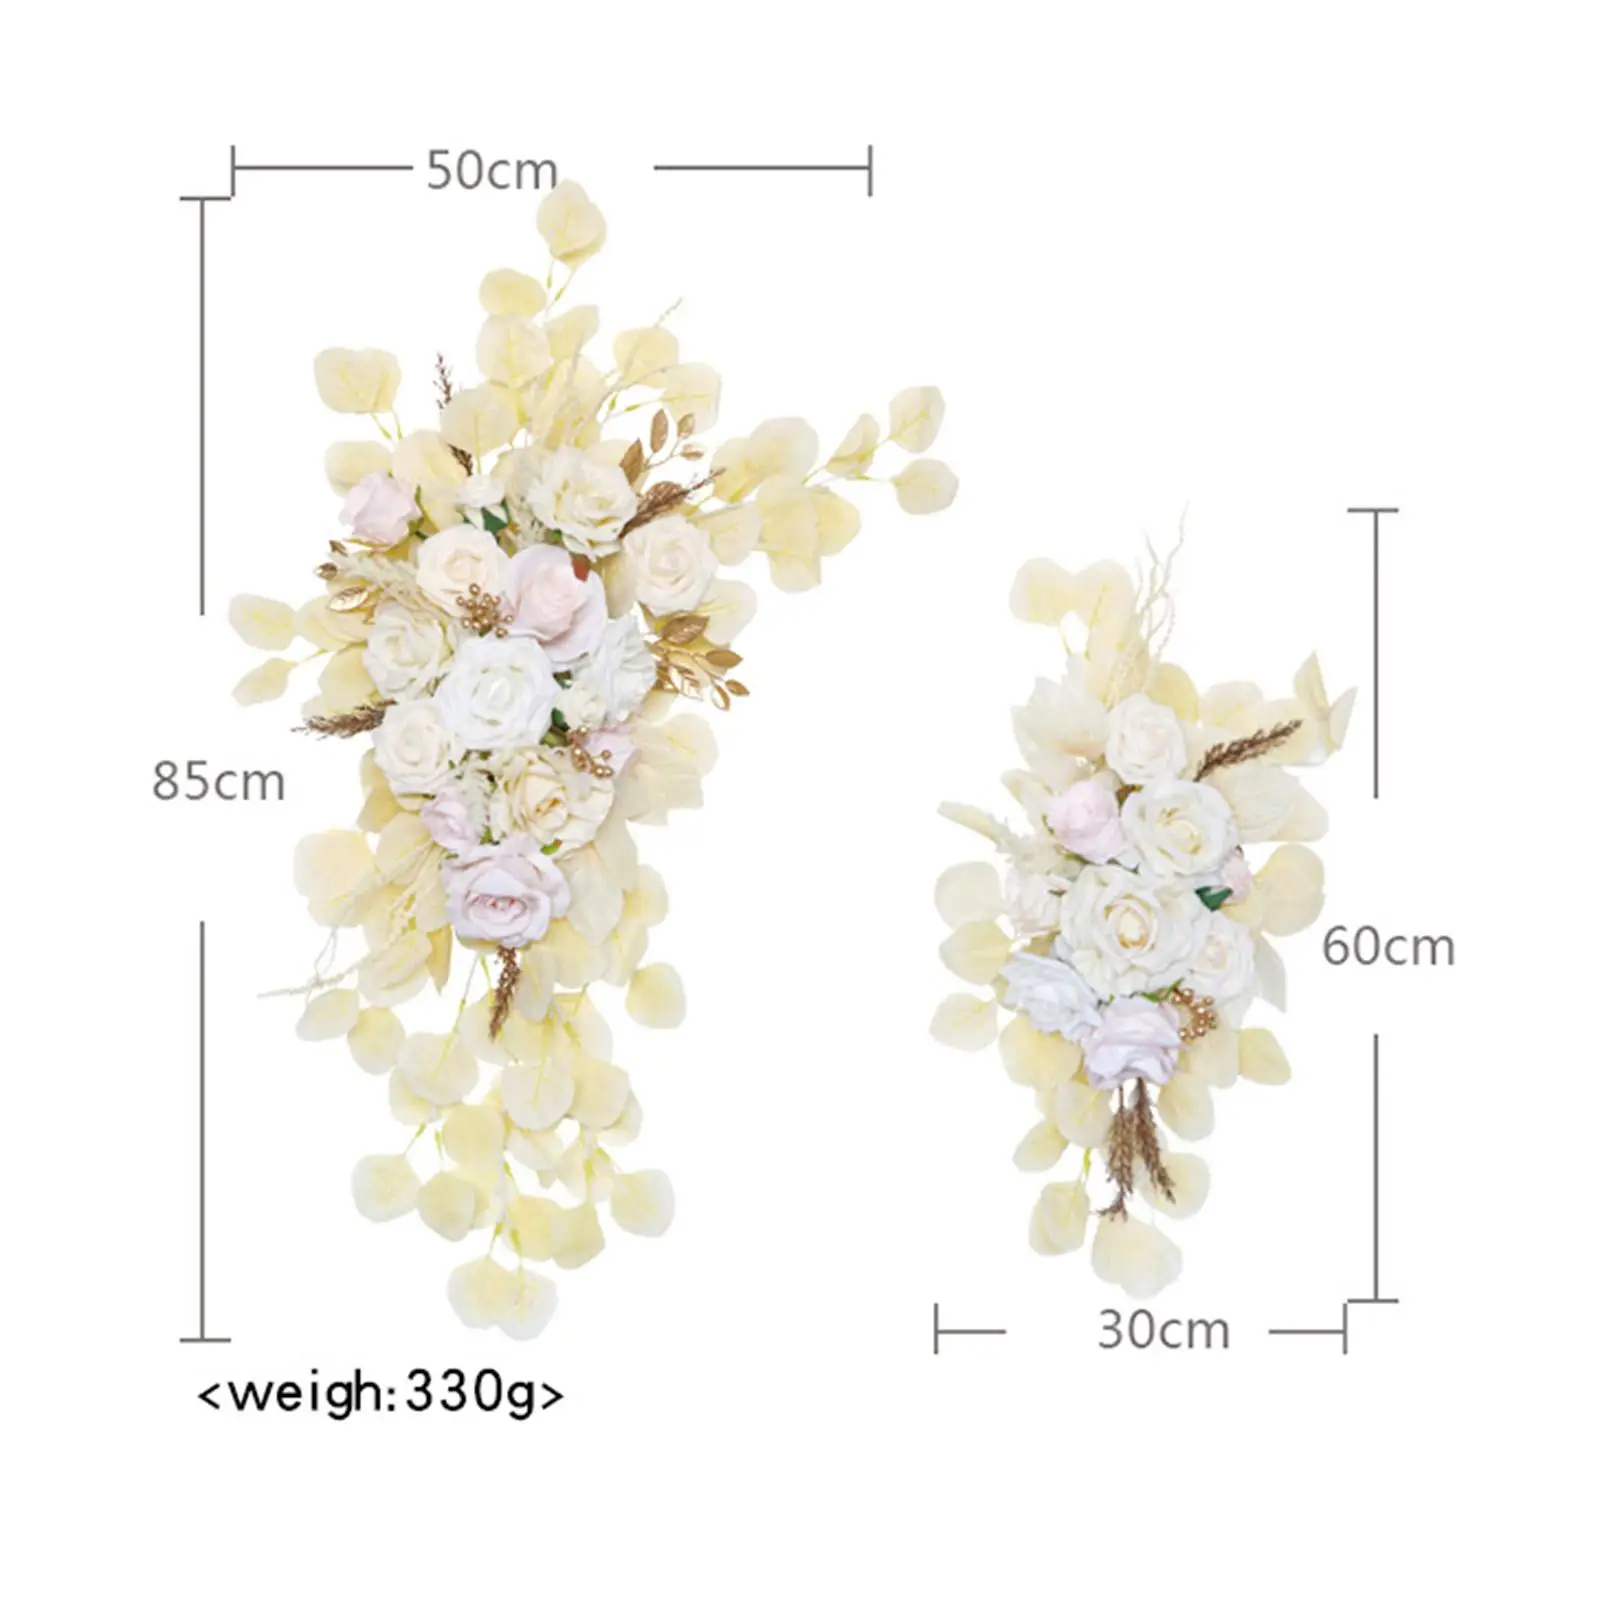 2x Artificial Flower Arch Decor Door Wreath Rose Flower Decorative Silk Floral Swags Artificial Floral Swag for window